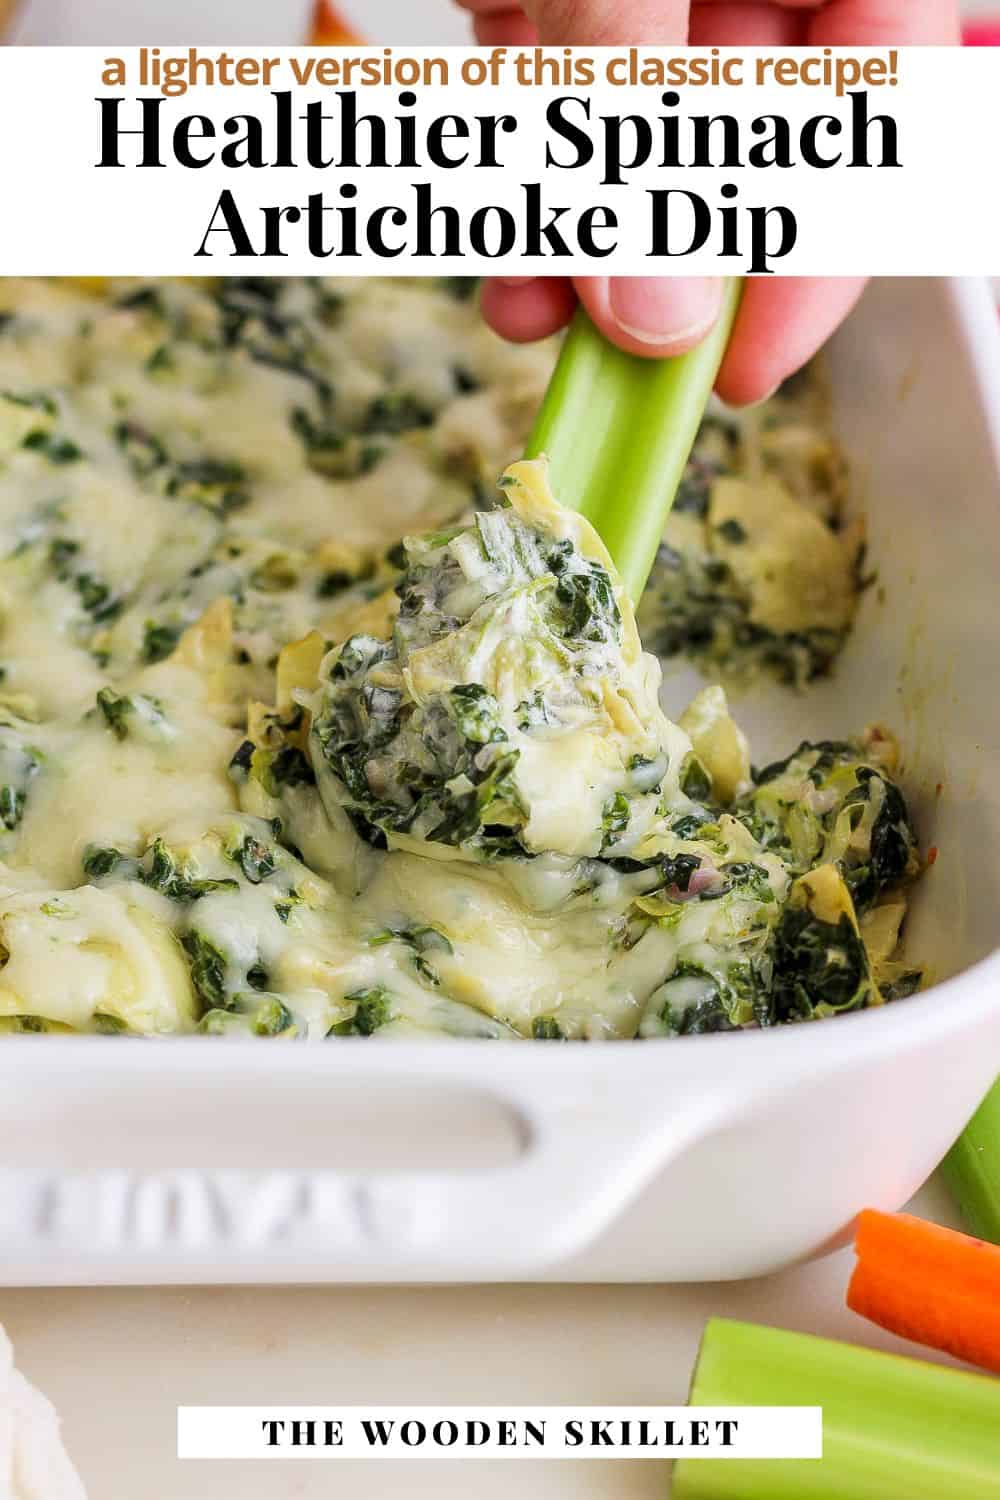 Healthy Spinach Artichoke Dip - The Wooden Skillet